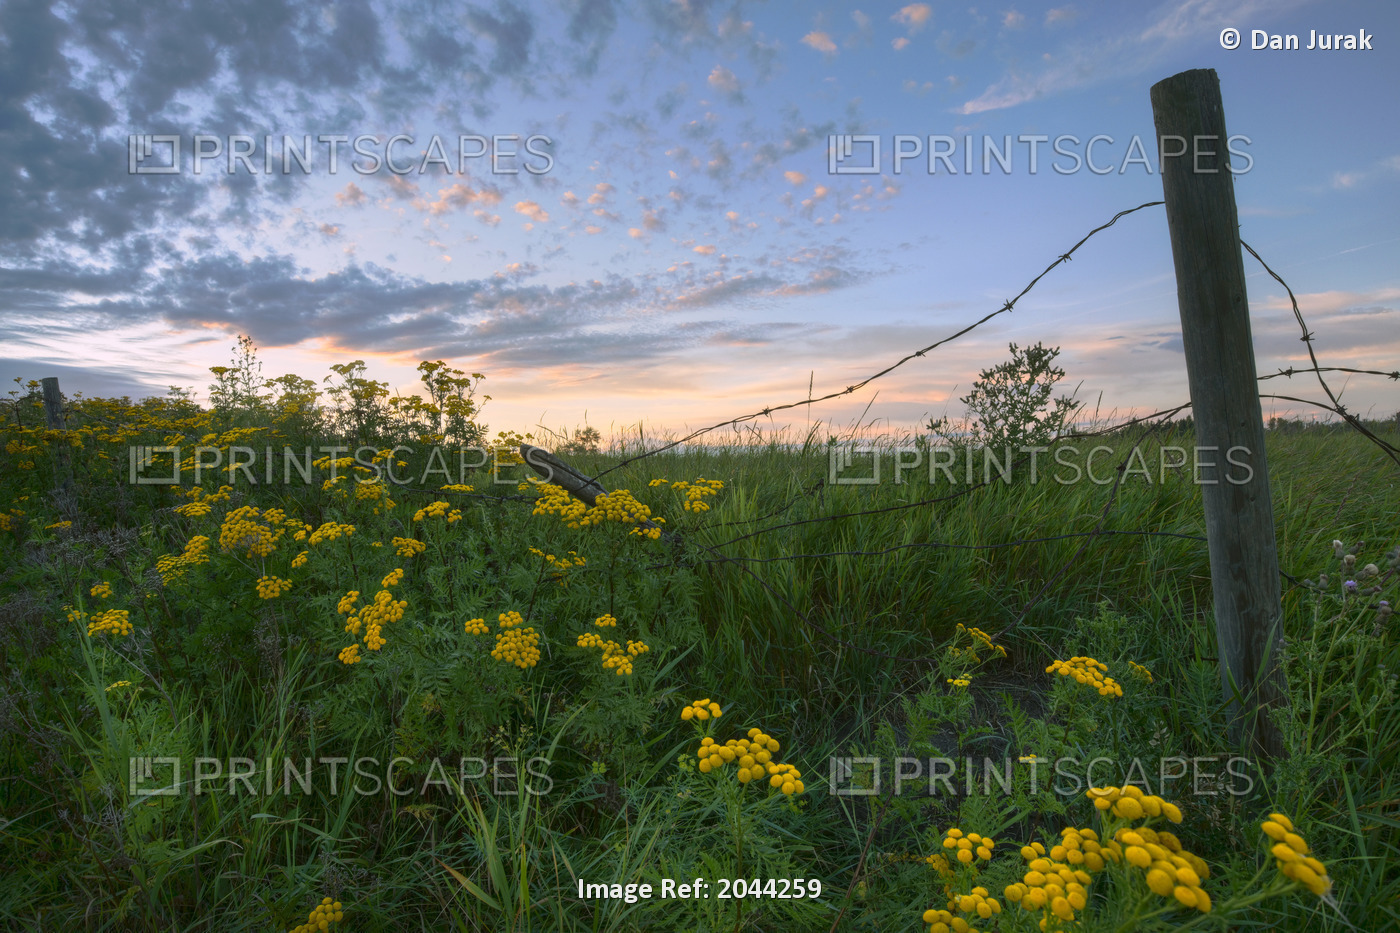 A Summer Evening Sky With Yellow Tansy Flowers And Barbed Wire Fence On A Farm ...